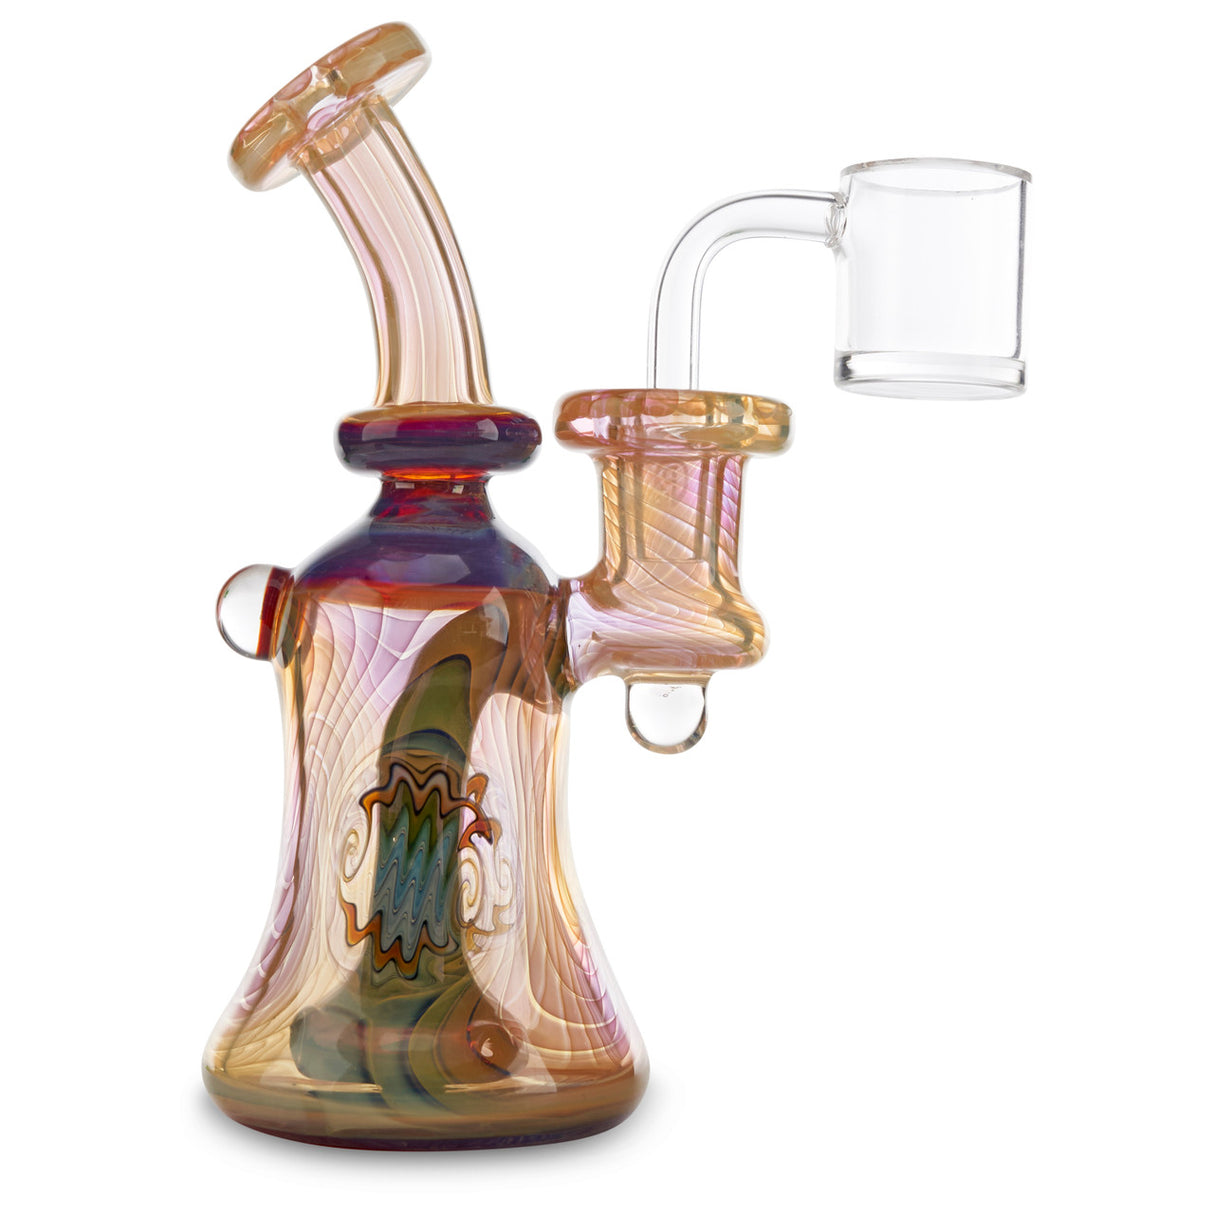 hefe glass banger hanger fumed rig for smoking oils and wax